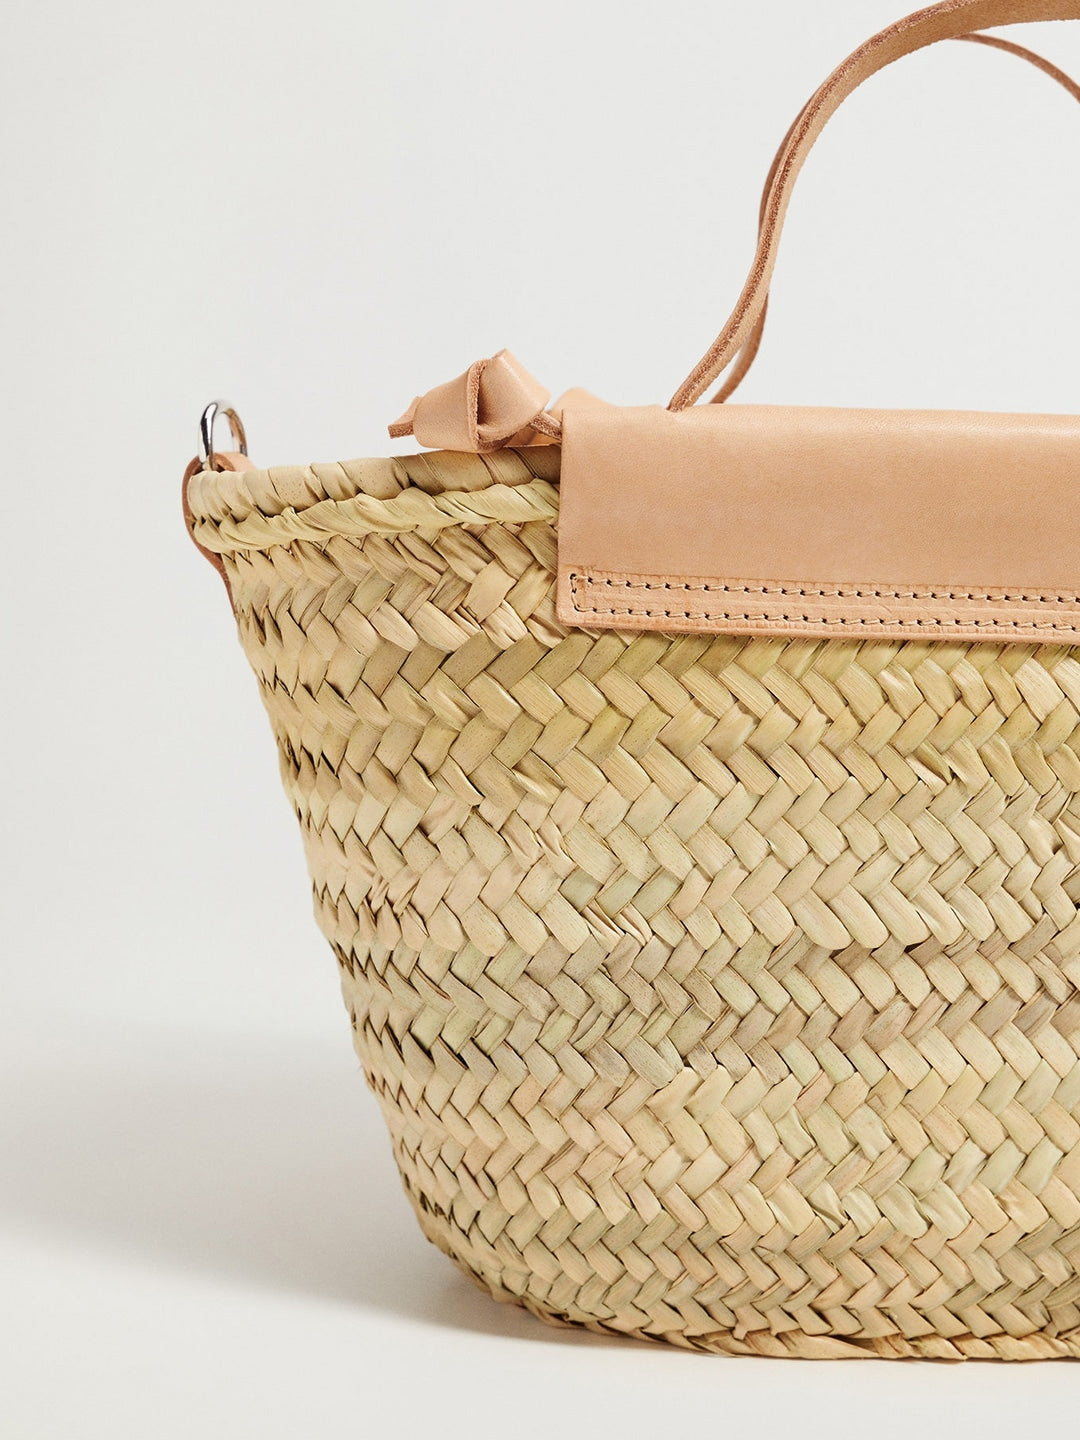 0a93b7ef-246c-4cd4-8cd2-6a4ac8ca98cb1631524756020-MANGO-Beige-Basket-Weave-Textured-Handcrafted-Sustainable-Ha-5